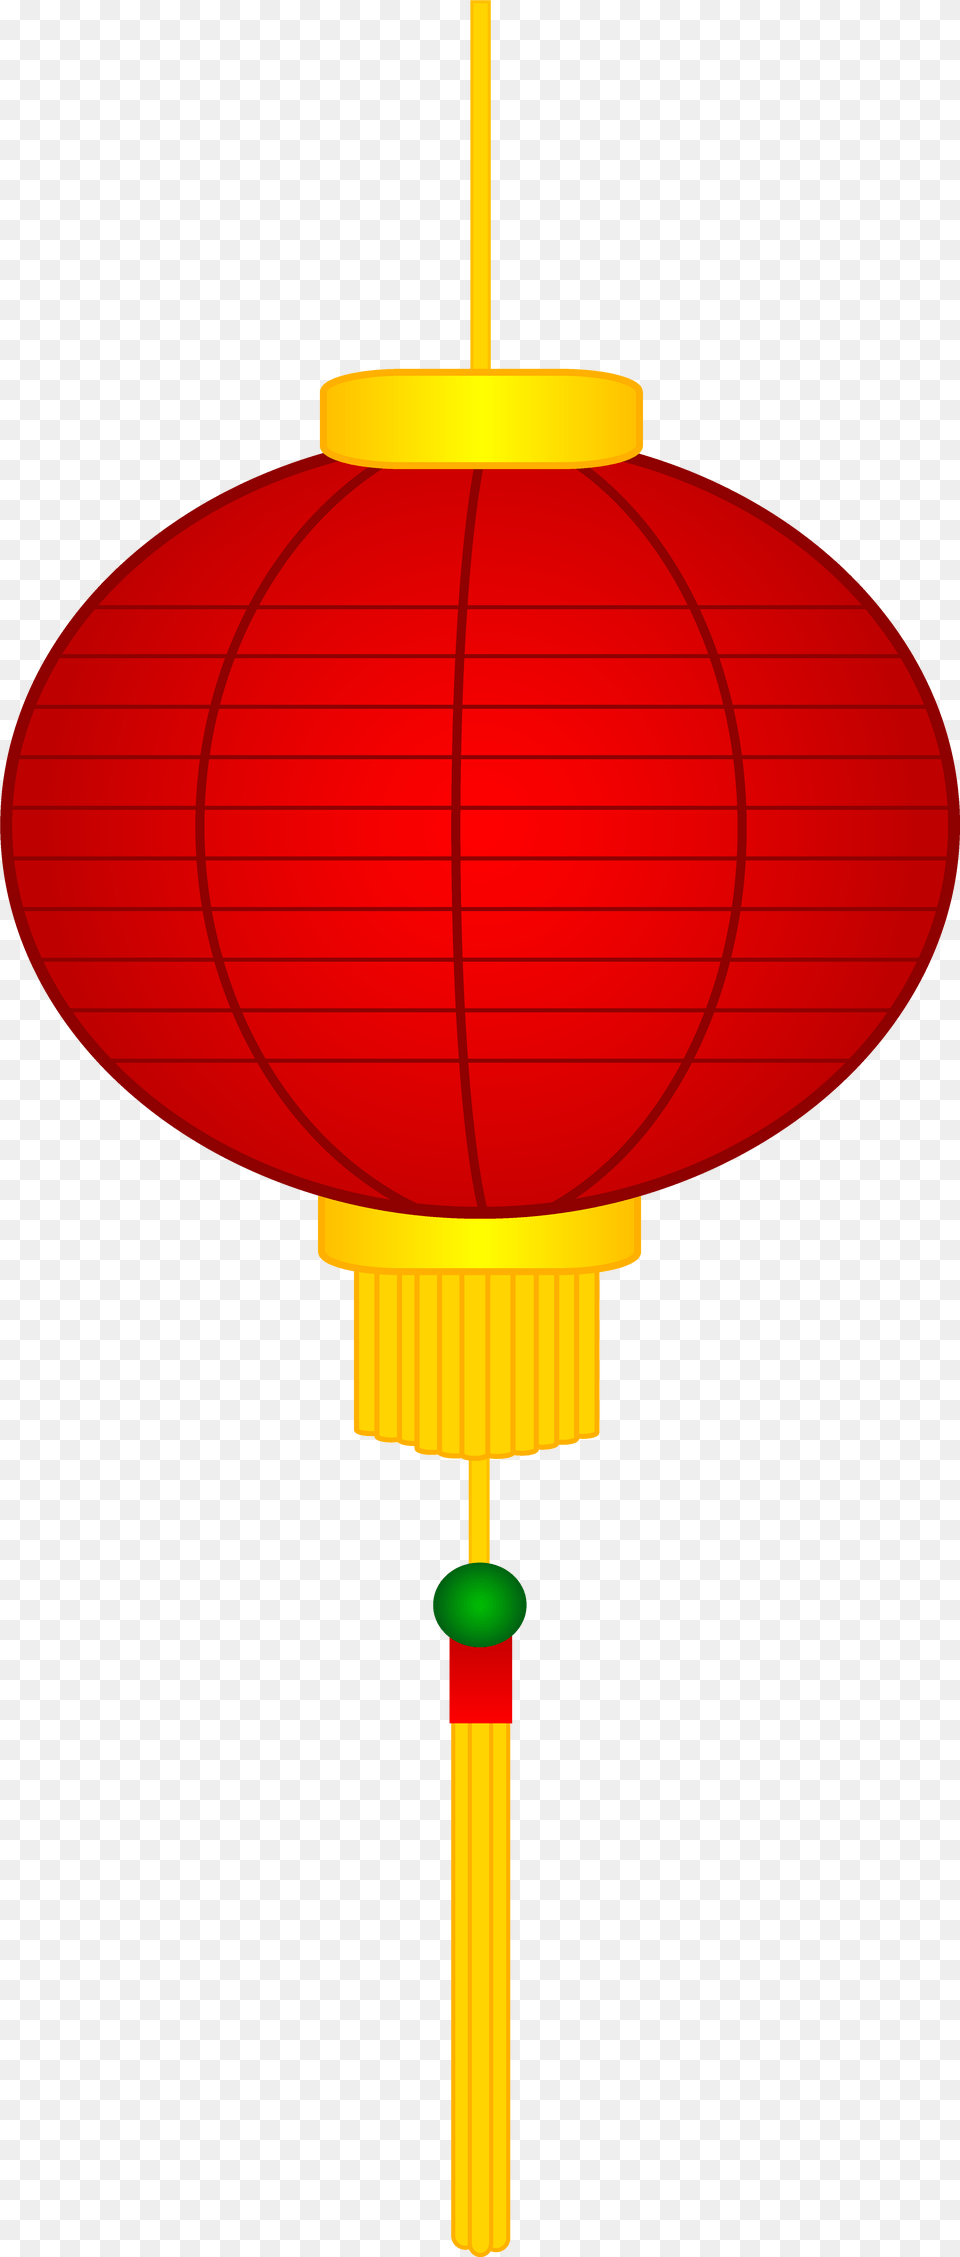 Chinese Lantern Clipart Transparent Background Clipartfest Red Chinese Lantern Clip Art, Lamp Free Png Download